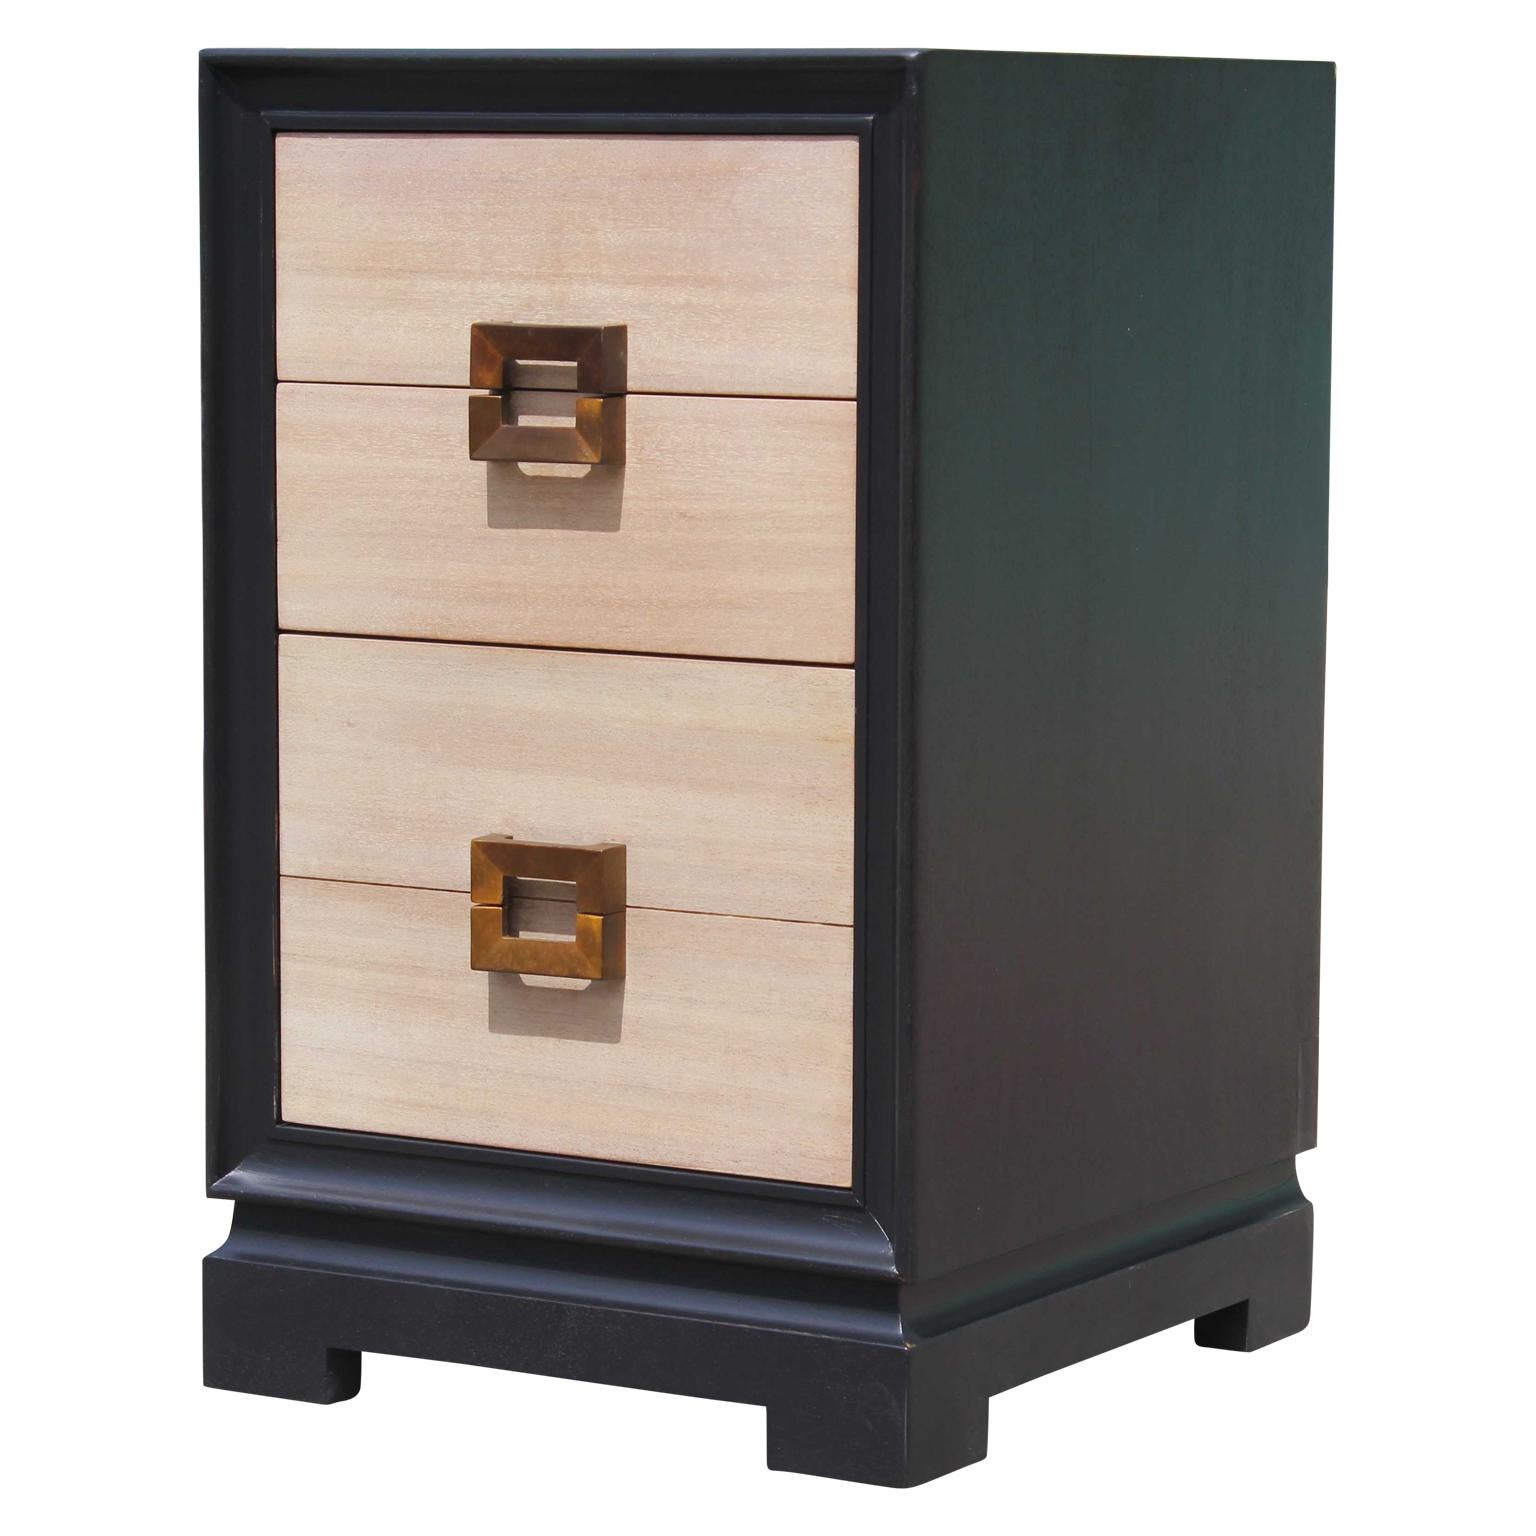 Mid-20th Century Modern Pair of Two-Tone Four-Drawer Nightstands with Neutral Finish